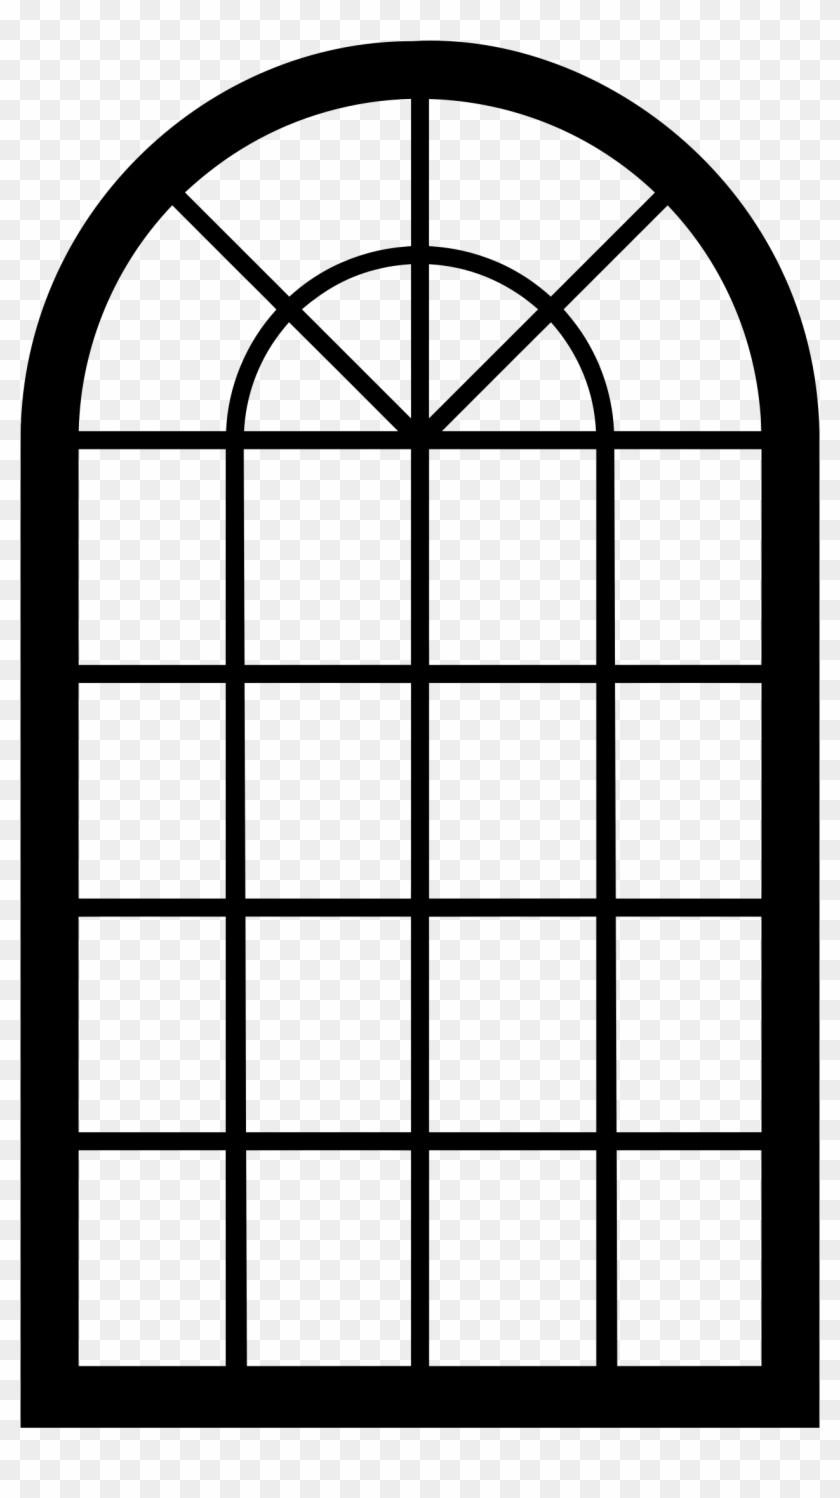 Tools And Parts - Arched Window Clipart #1028211